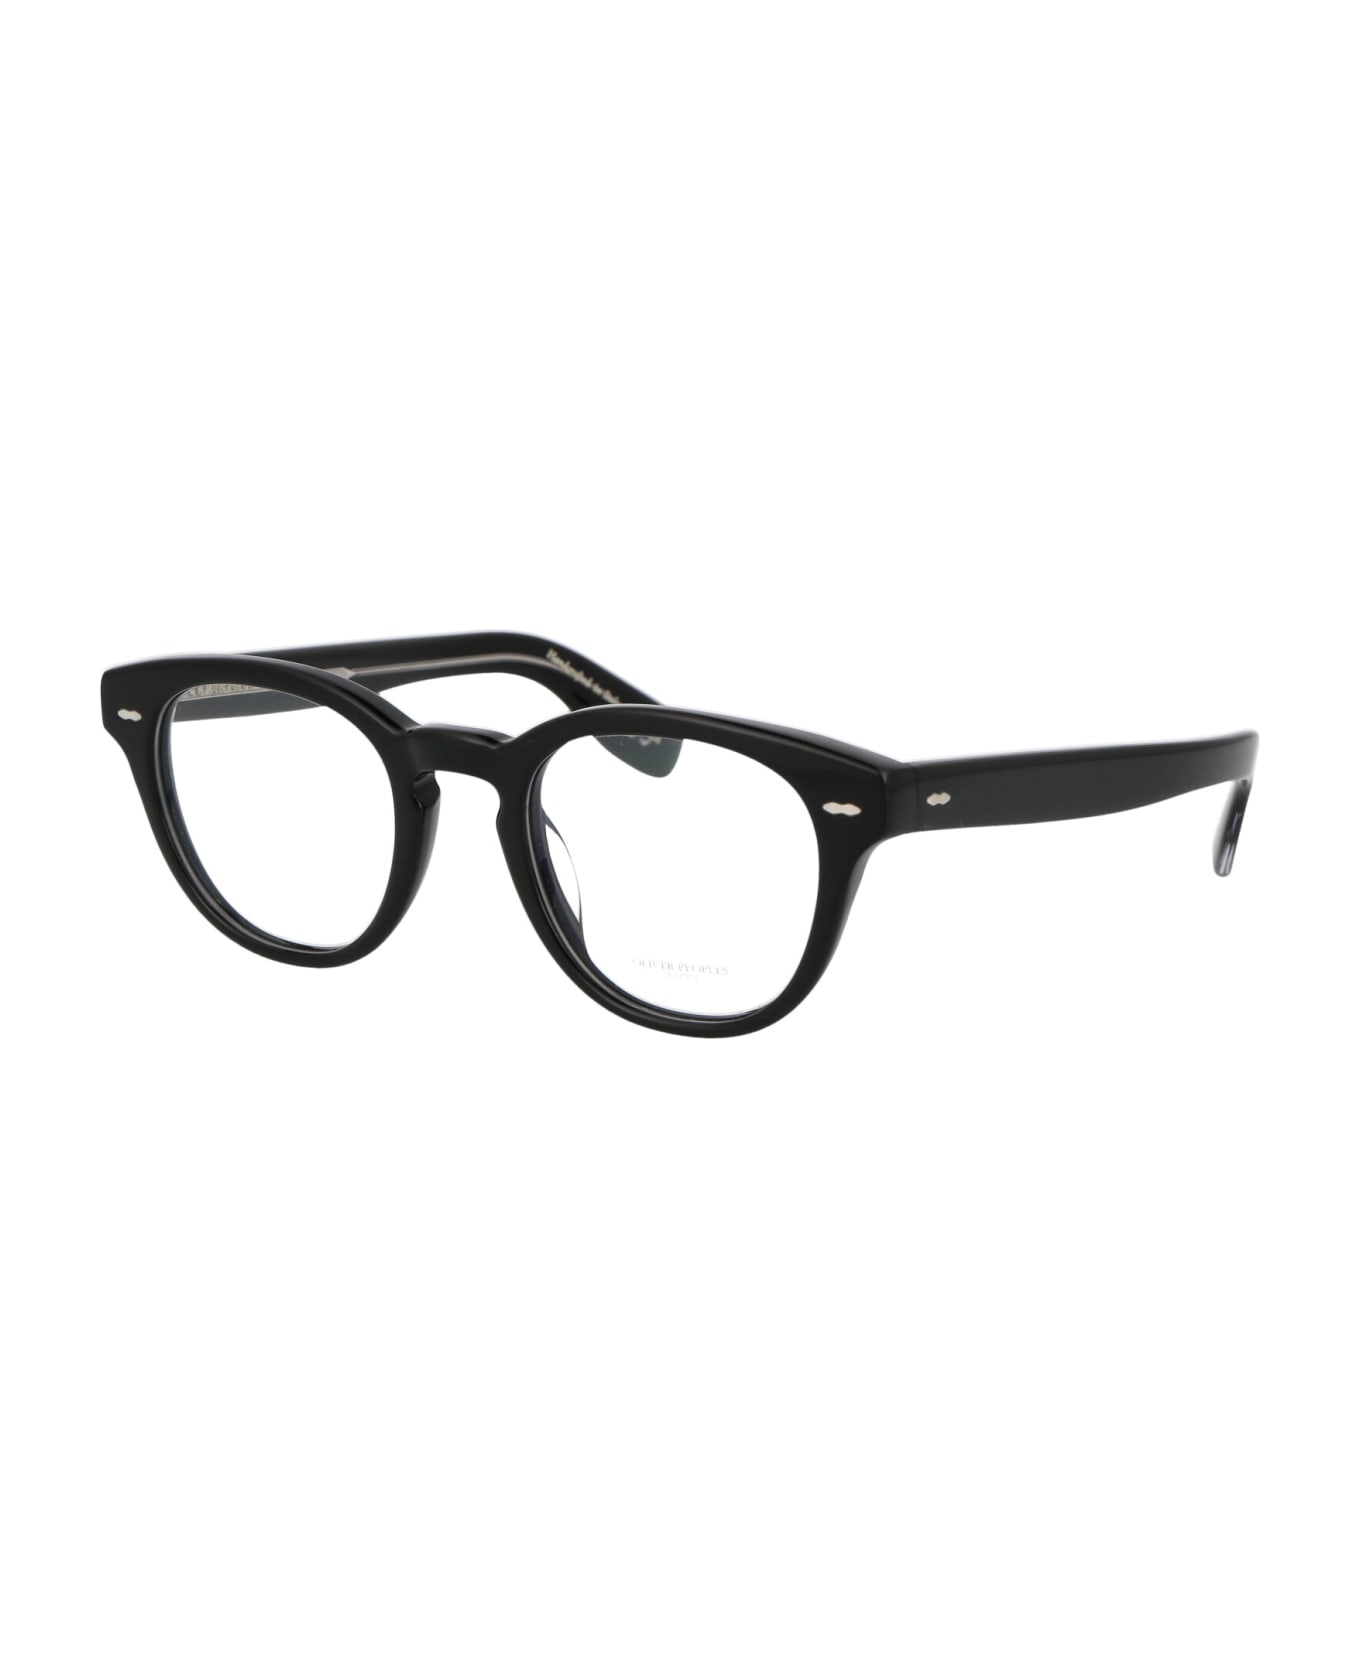 Oliver Peoples Cary Grant Glasses - 1492 Black アイウェア